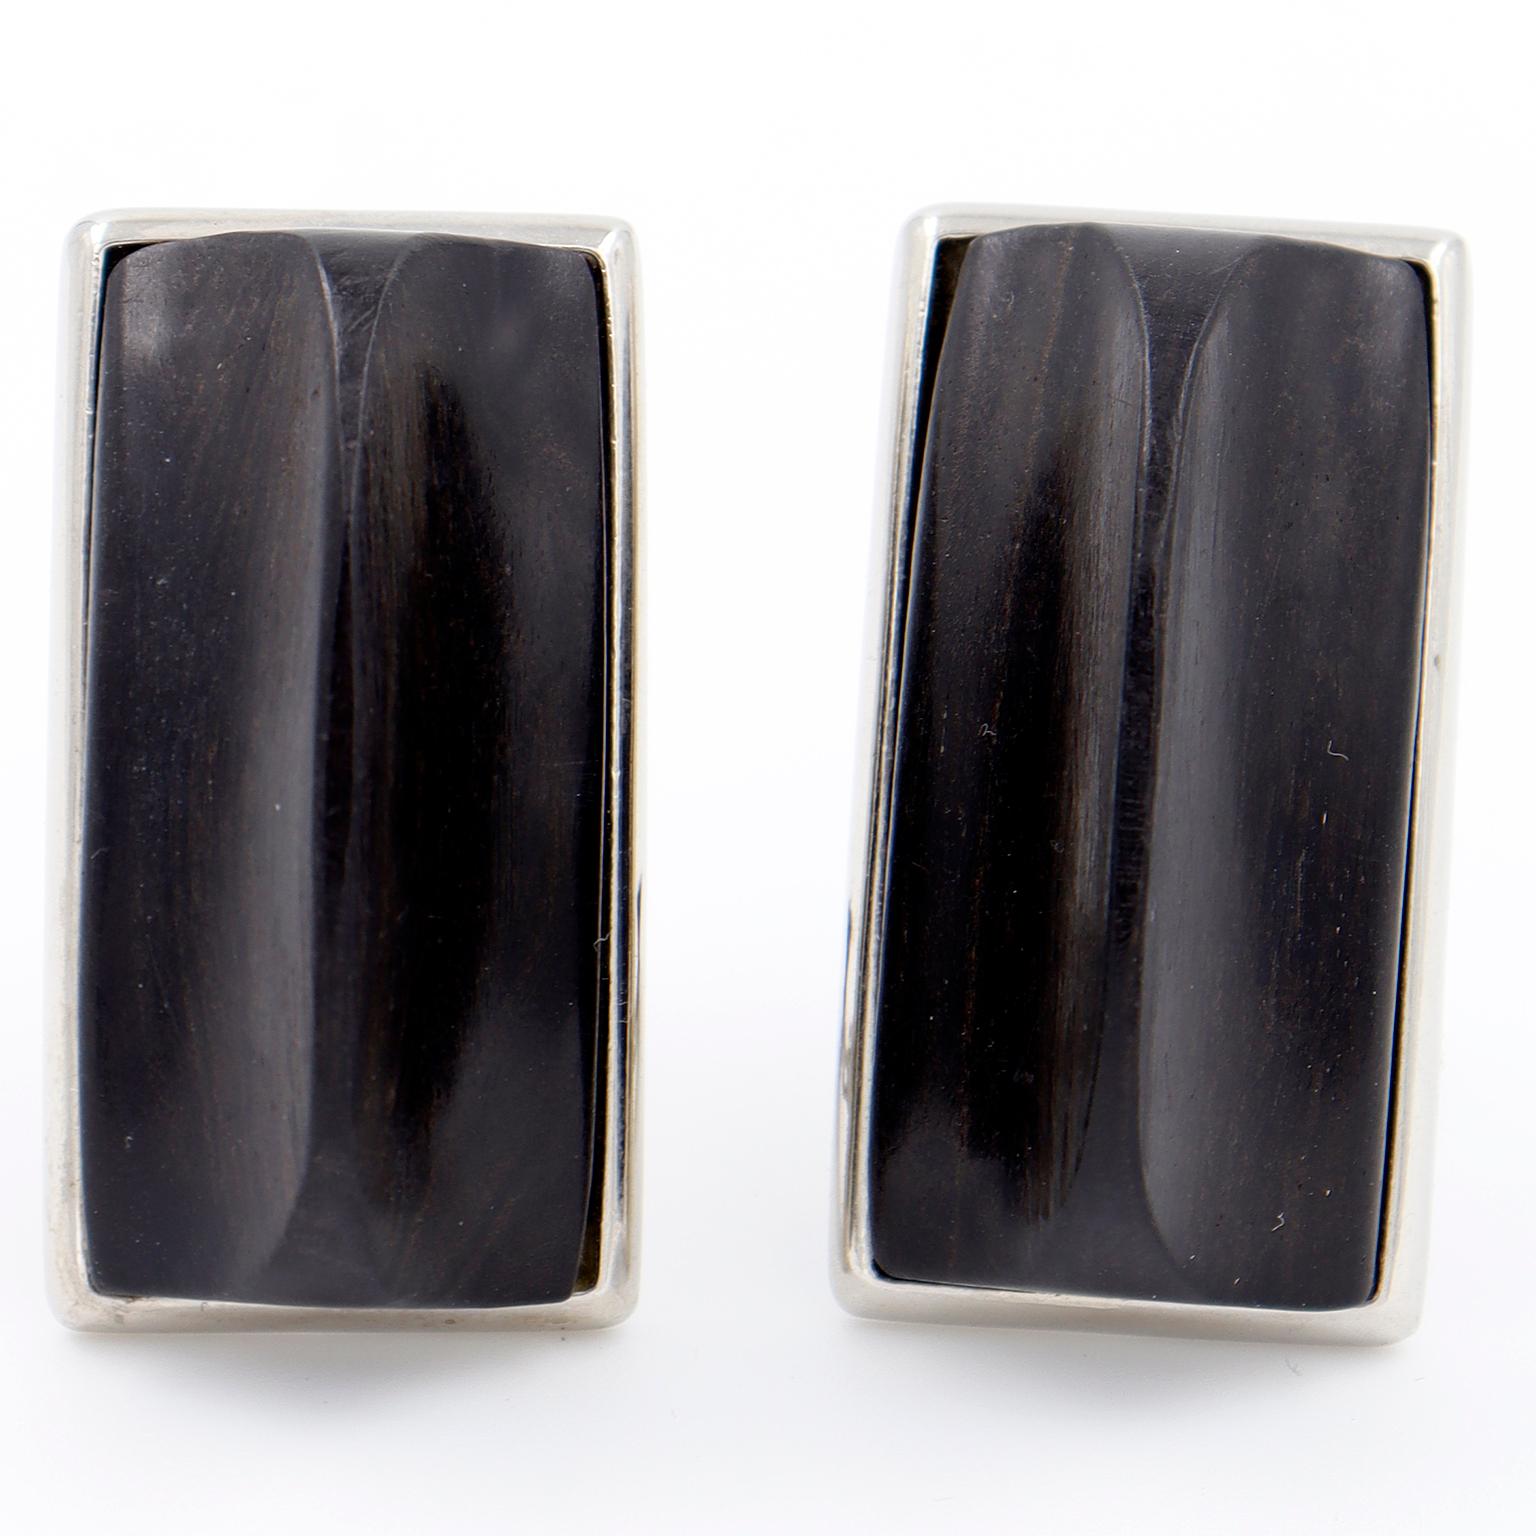 These oversized vintage YSL black ebony wood earrings are so unique and they are a raised 